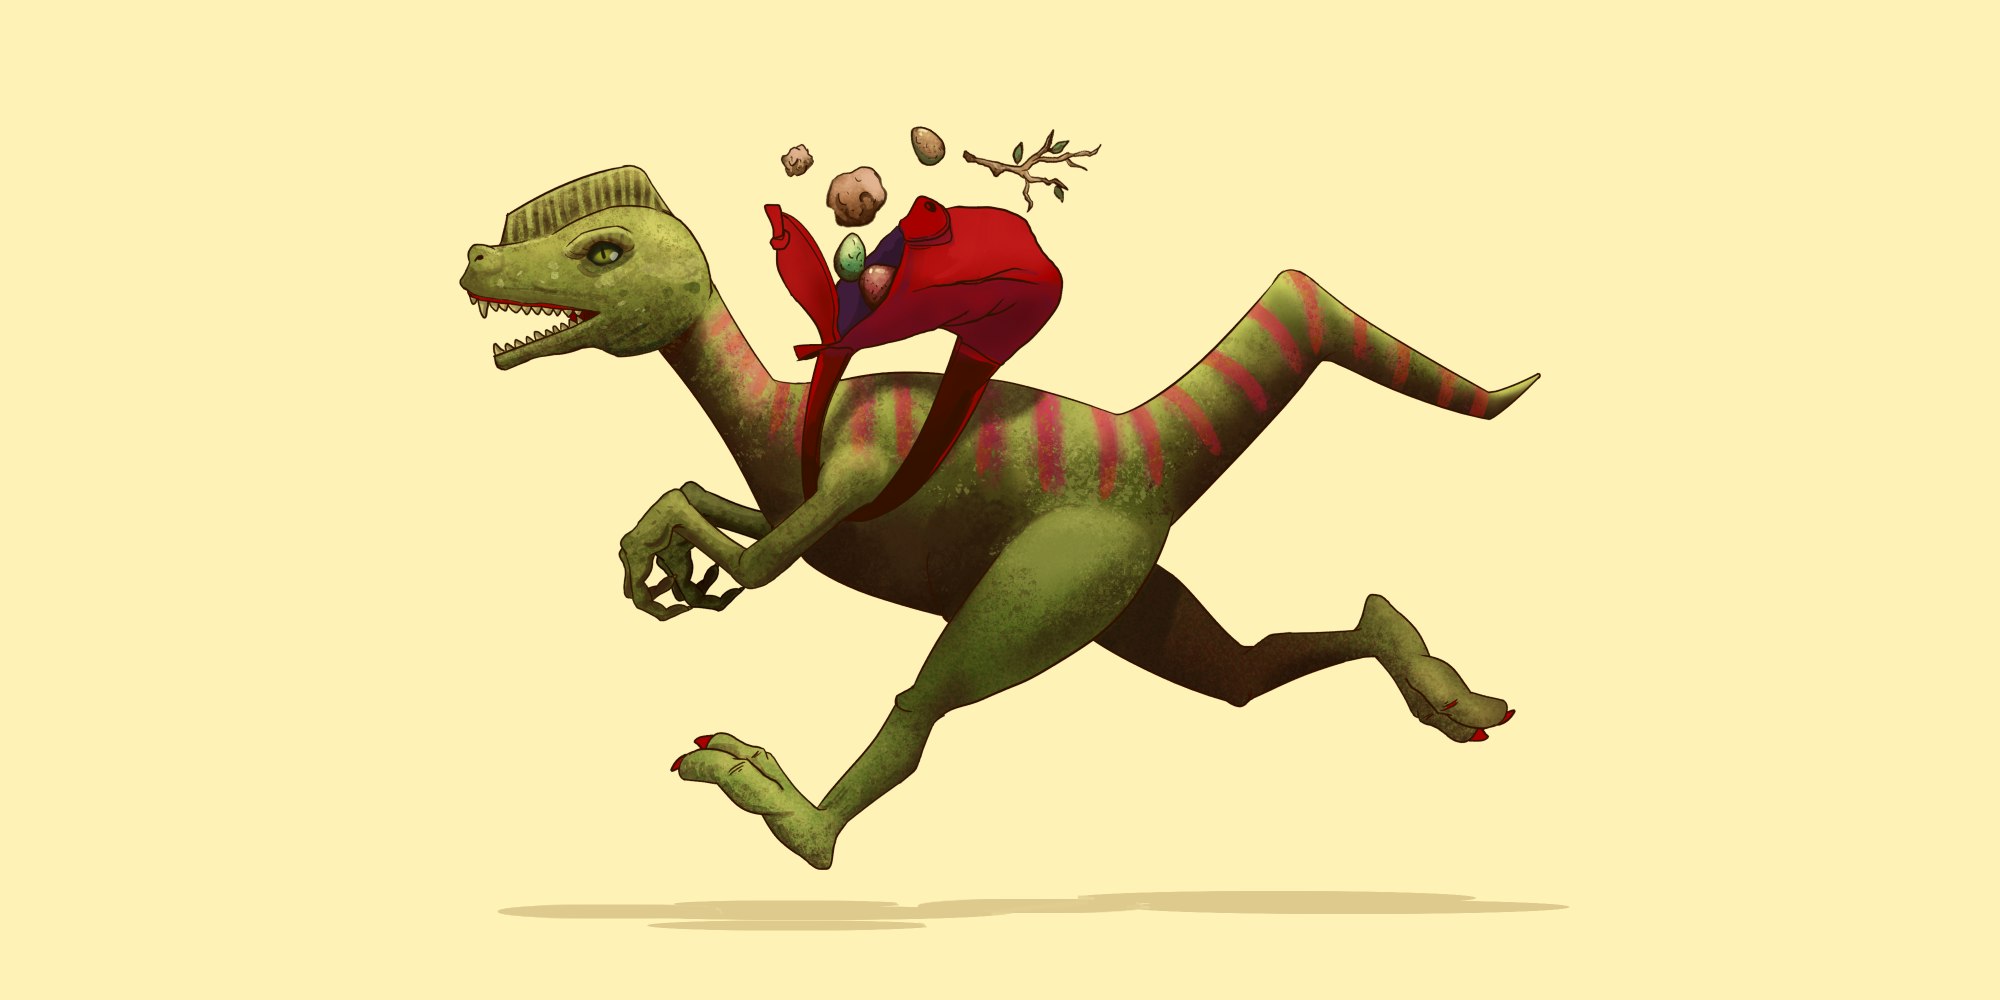 Free Art - Dinosaur running fast while wearing a backpack | Mixkit